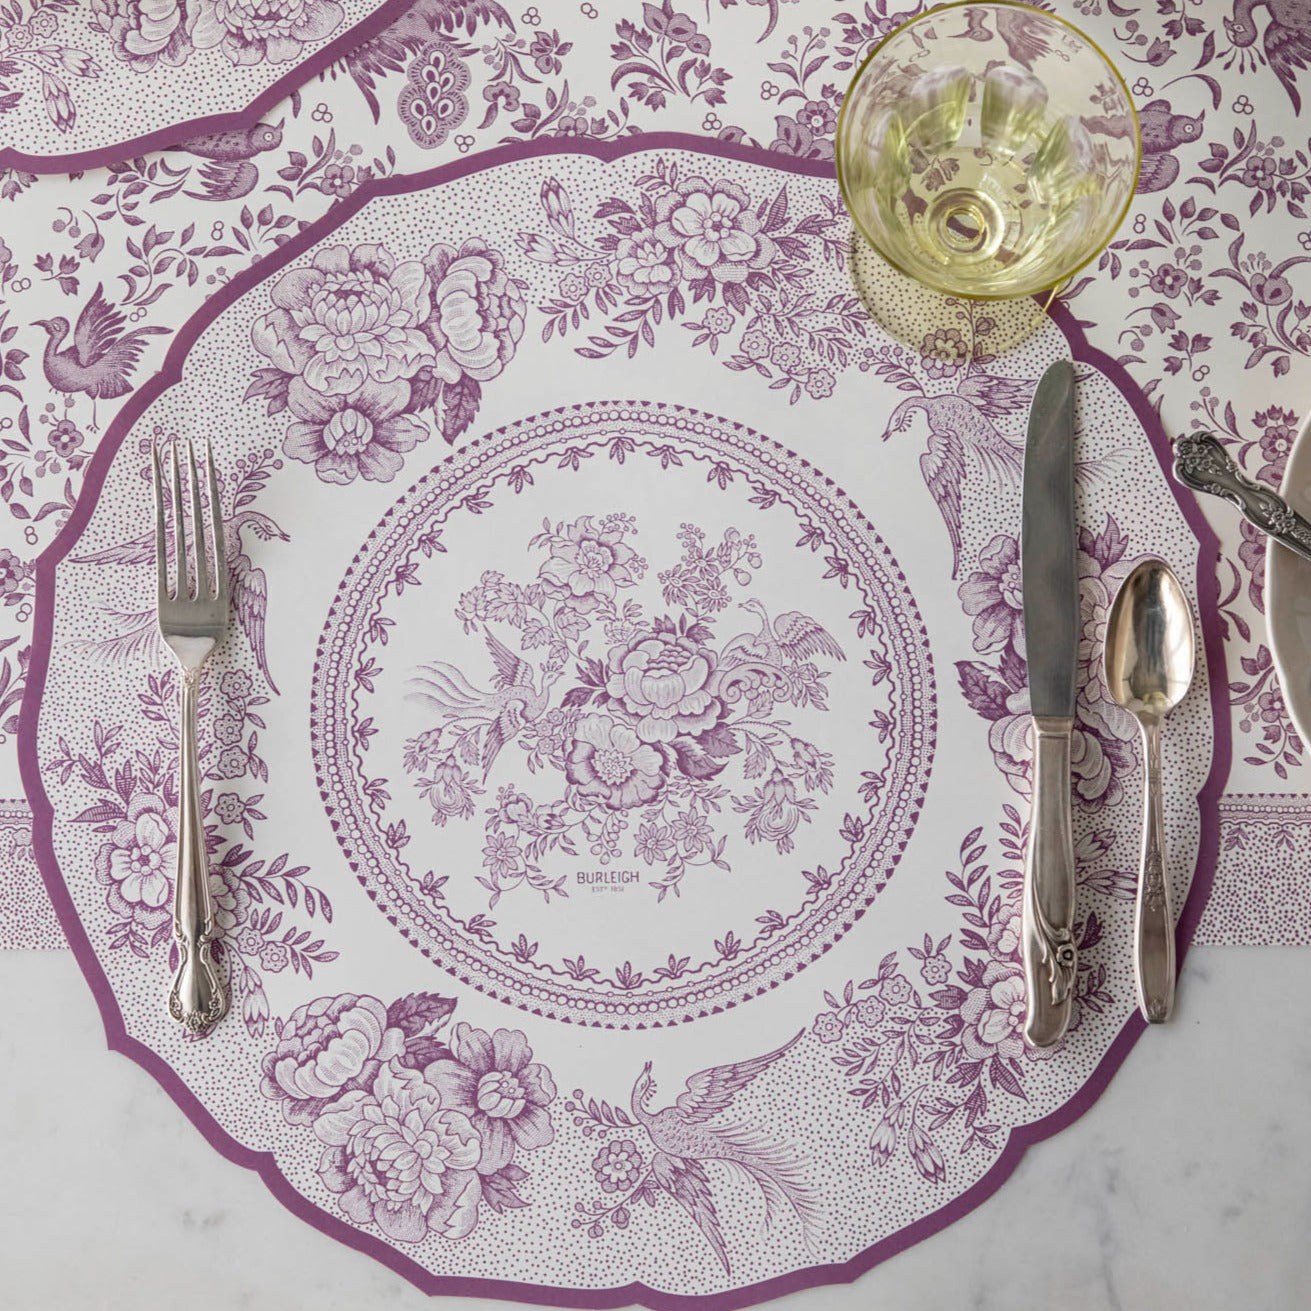 A purple and white tablescape with the Hester &amp; Cook Die-cut Lilac Asiatic Pheasants Placemats, silverware, and utensils.